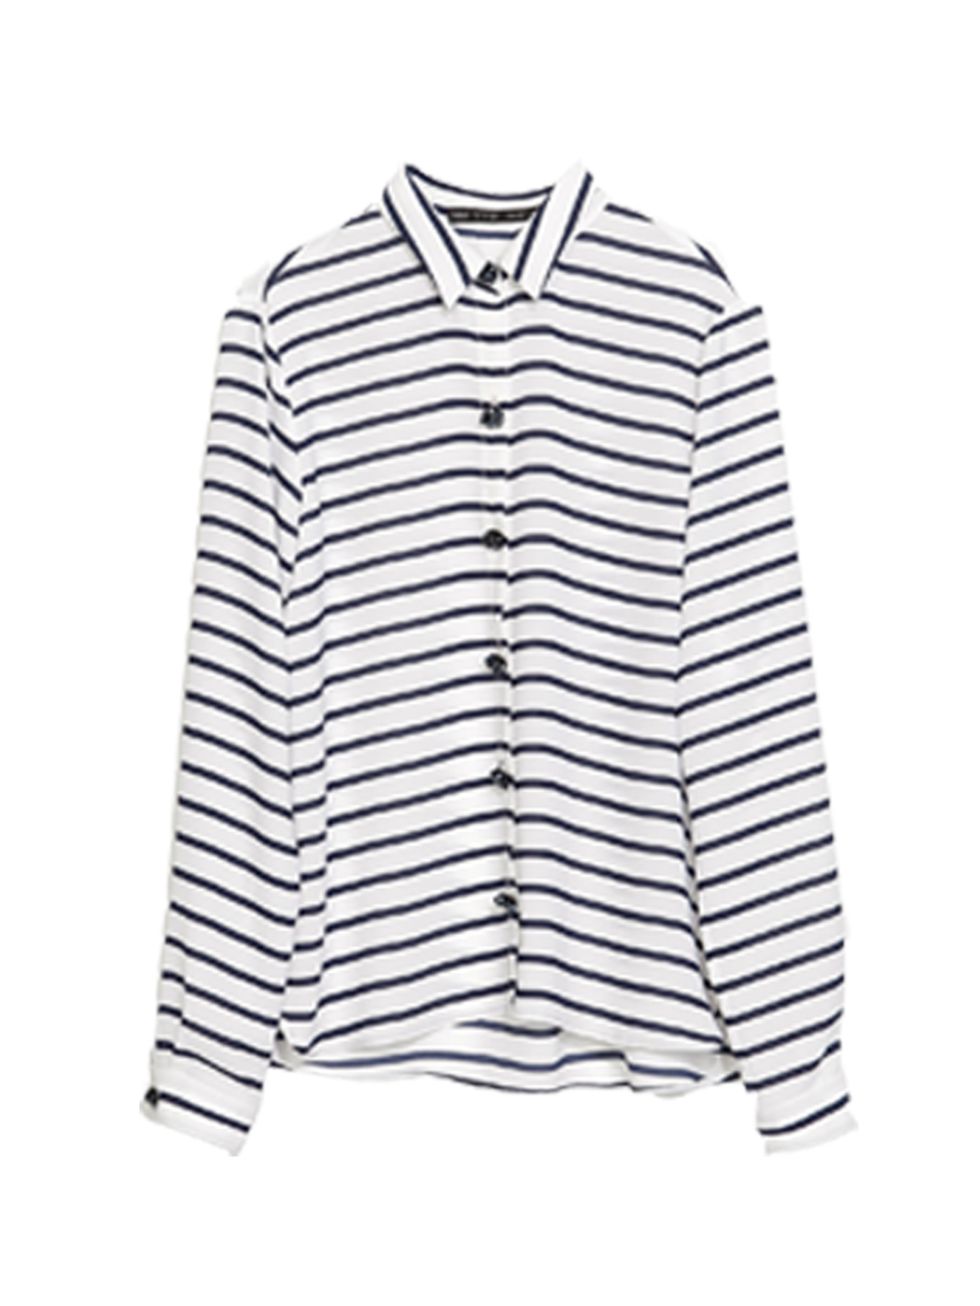 <p>This striped shirt is perfect for masculine/feminine dressing.</p><p>Shirt by <a href="http://www.zara.com/uk/en/woman/shirts/shirts/striped-shirt-with-jewel-buttons-c401033p1720502.html">Zara</a>, £29.99</p>